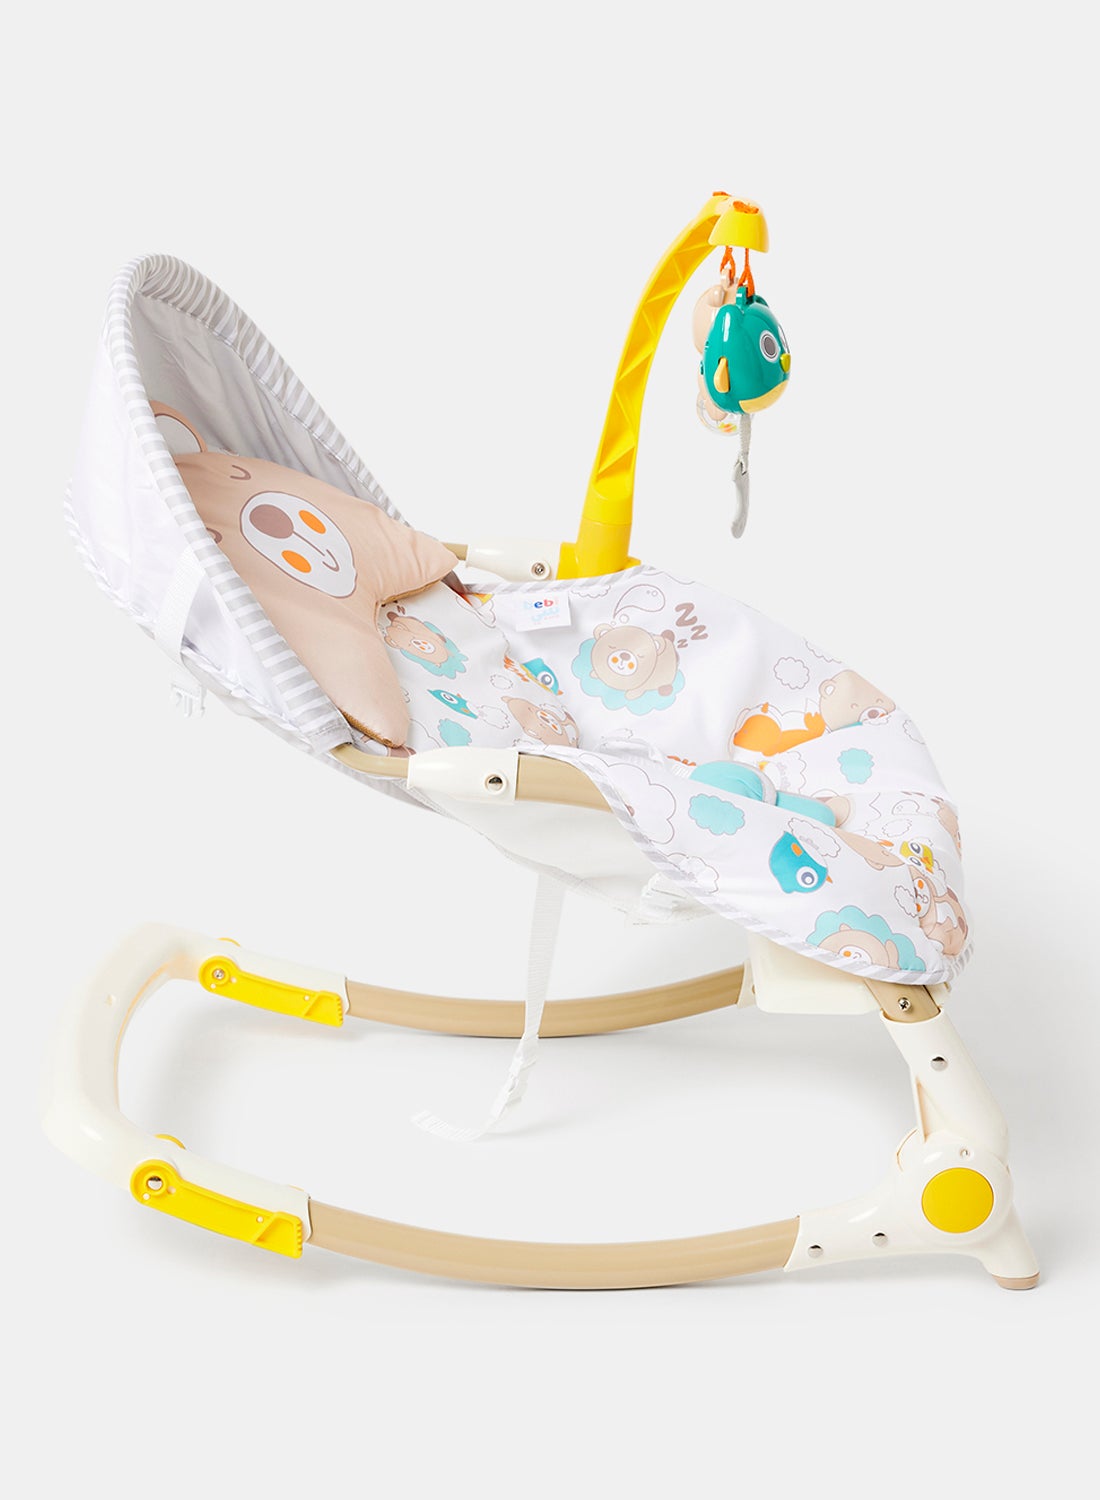 Baby Rocking Chair With Vibration And Music Multipurpose Infant-To-Toddler Reclining Suitable For Newborn Babies Up To 3 Years Old Multicolour 